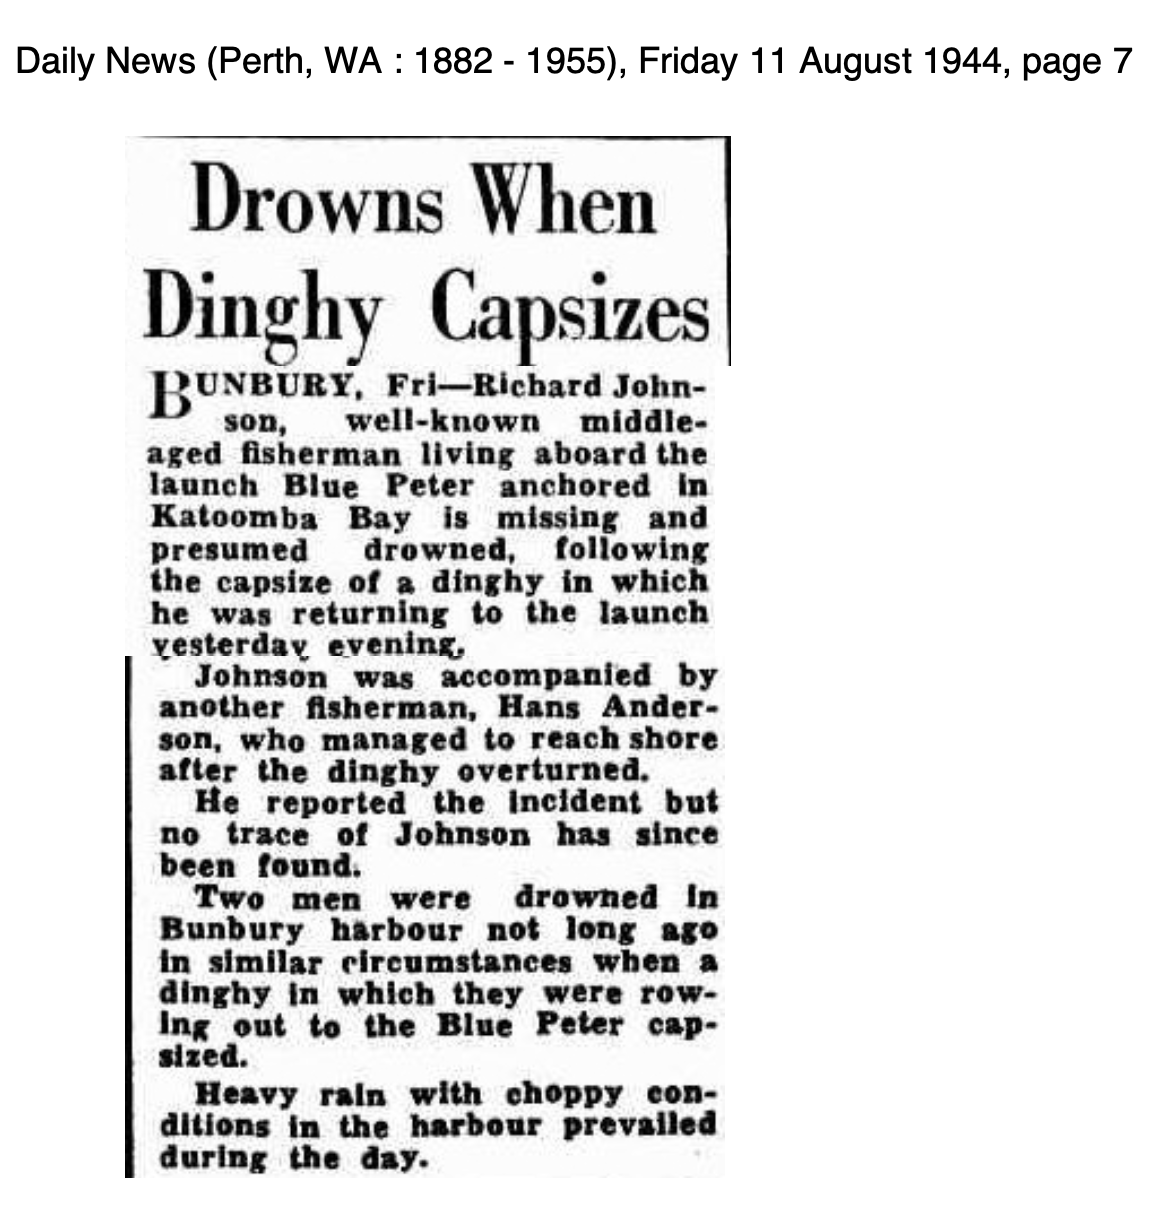 The Daily News, Friday 11 August 1944